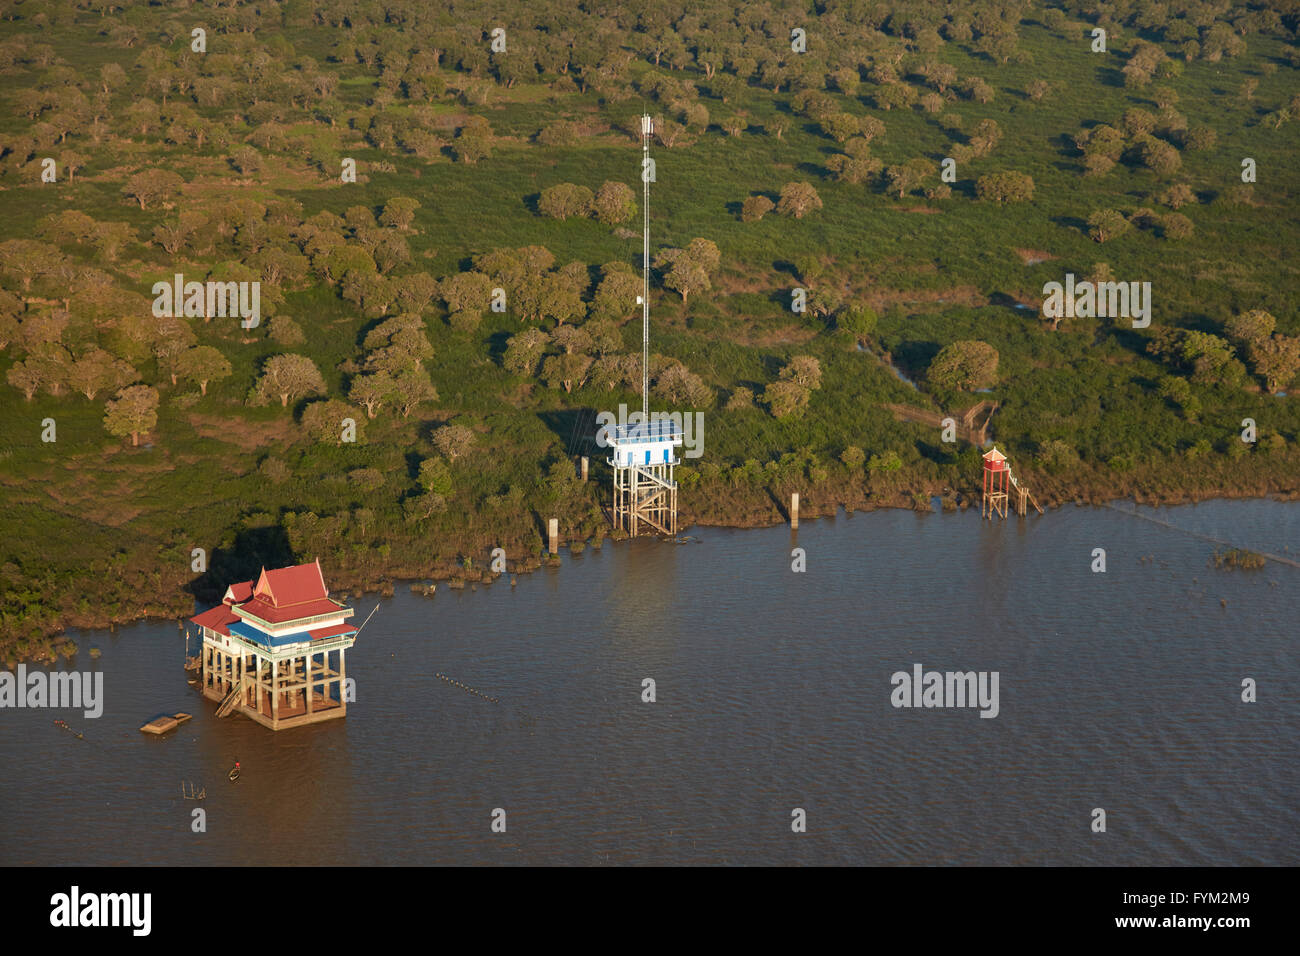 Temple on stilts and communications aerial, Tonlé Sap Lake, near Siem Reap, Cambodia - aerial Stock Photo